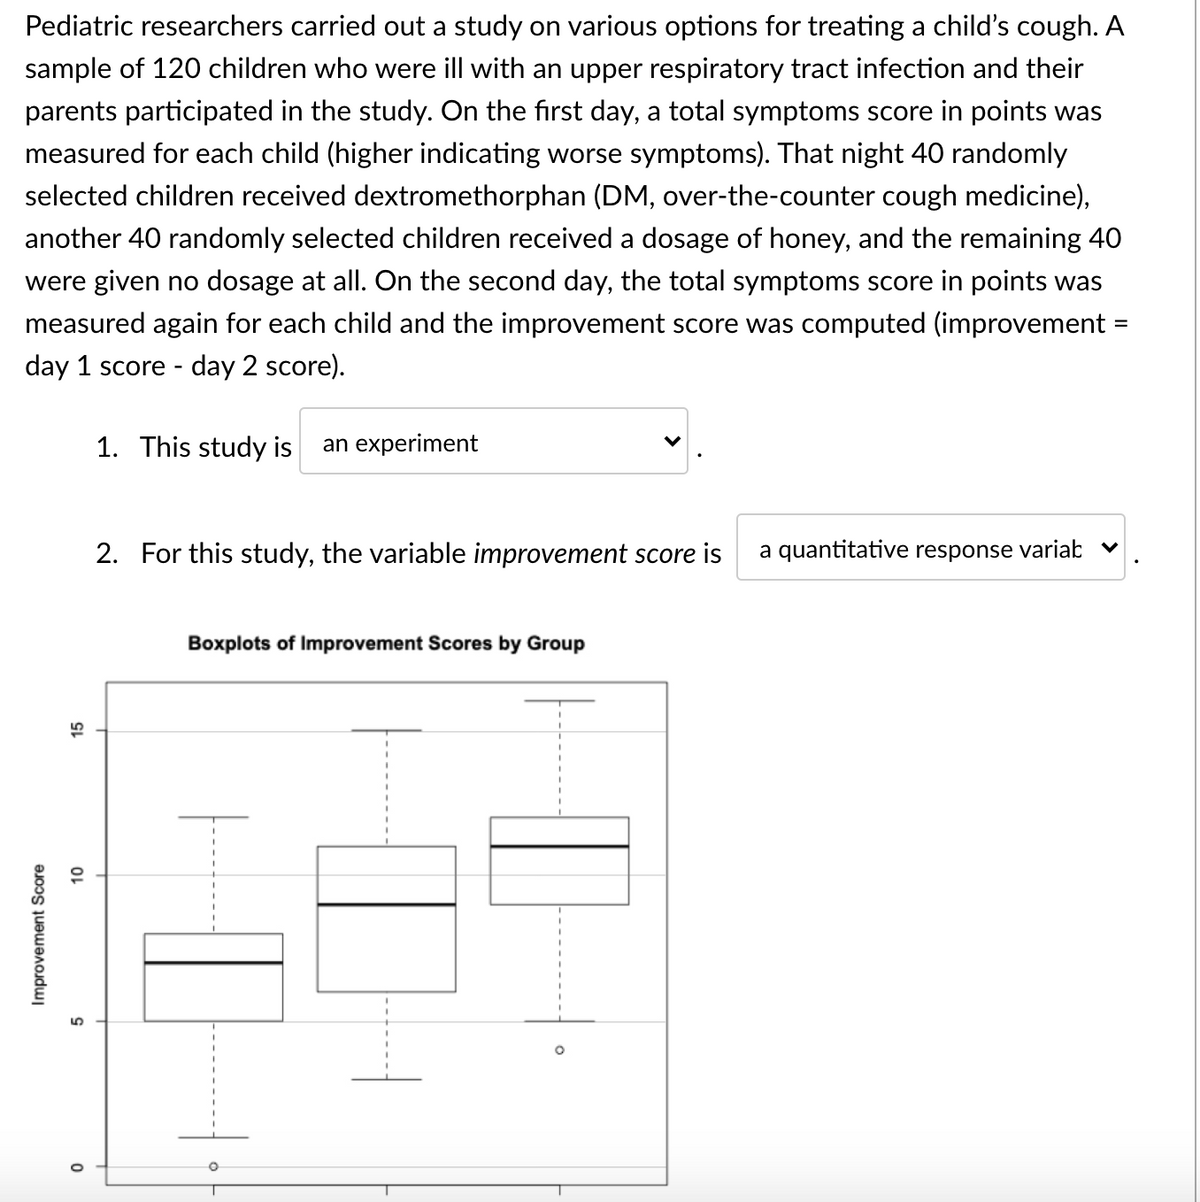 Pediatric researchers carried out a study on various options for treating a child's cough. A
sample of 120 children who were ill with an upper respiratory tract infection and their
parents participated in the study. On the first day, a total symptoms score in points was
measured for each child (higher indicating worse symptoms). That night 40 randomly
selected children received dextromethorphan (DM, over-the-counter cough medicine),
another 40 randomly selected children received a dosage of honey, and the remaining 40
were given no dosage at all. On the second day, the total symptoms score in points was
measured again for each child and the improvement score was computed (improvement
%3D
day 1 score - day 2 score).
1. This study is
an experiment
2. For this study, the variable improvement score is
a quantitative response variab v
Boxplots of Improvement Scores by Group
Improvement Score
15
